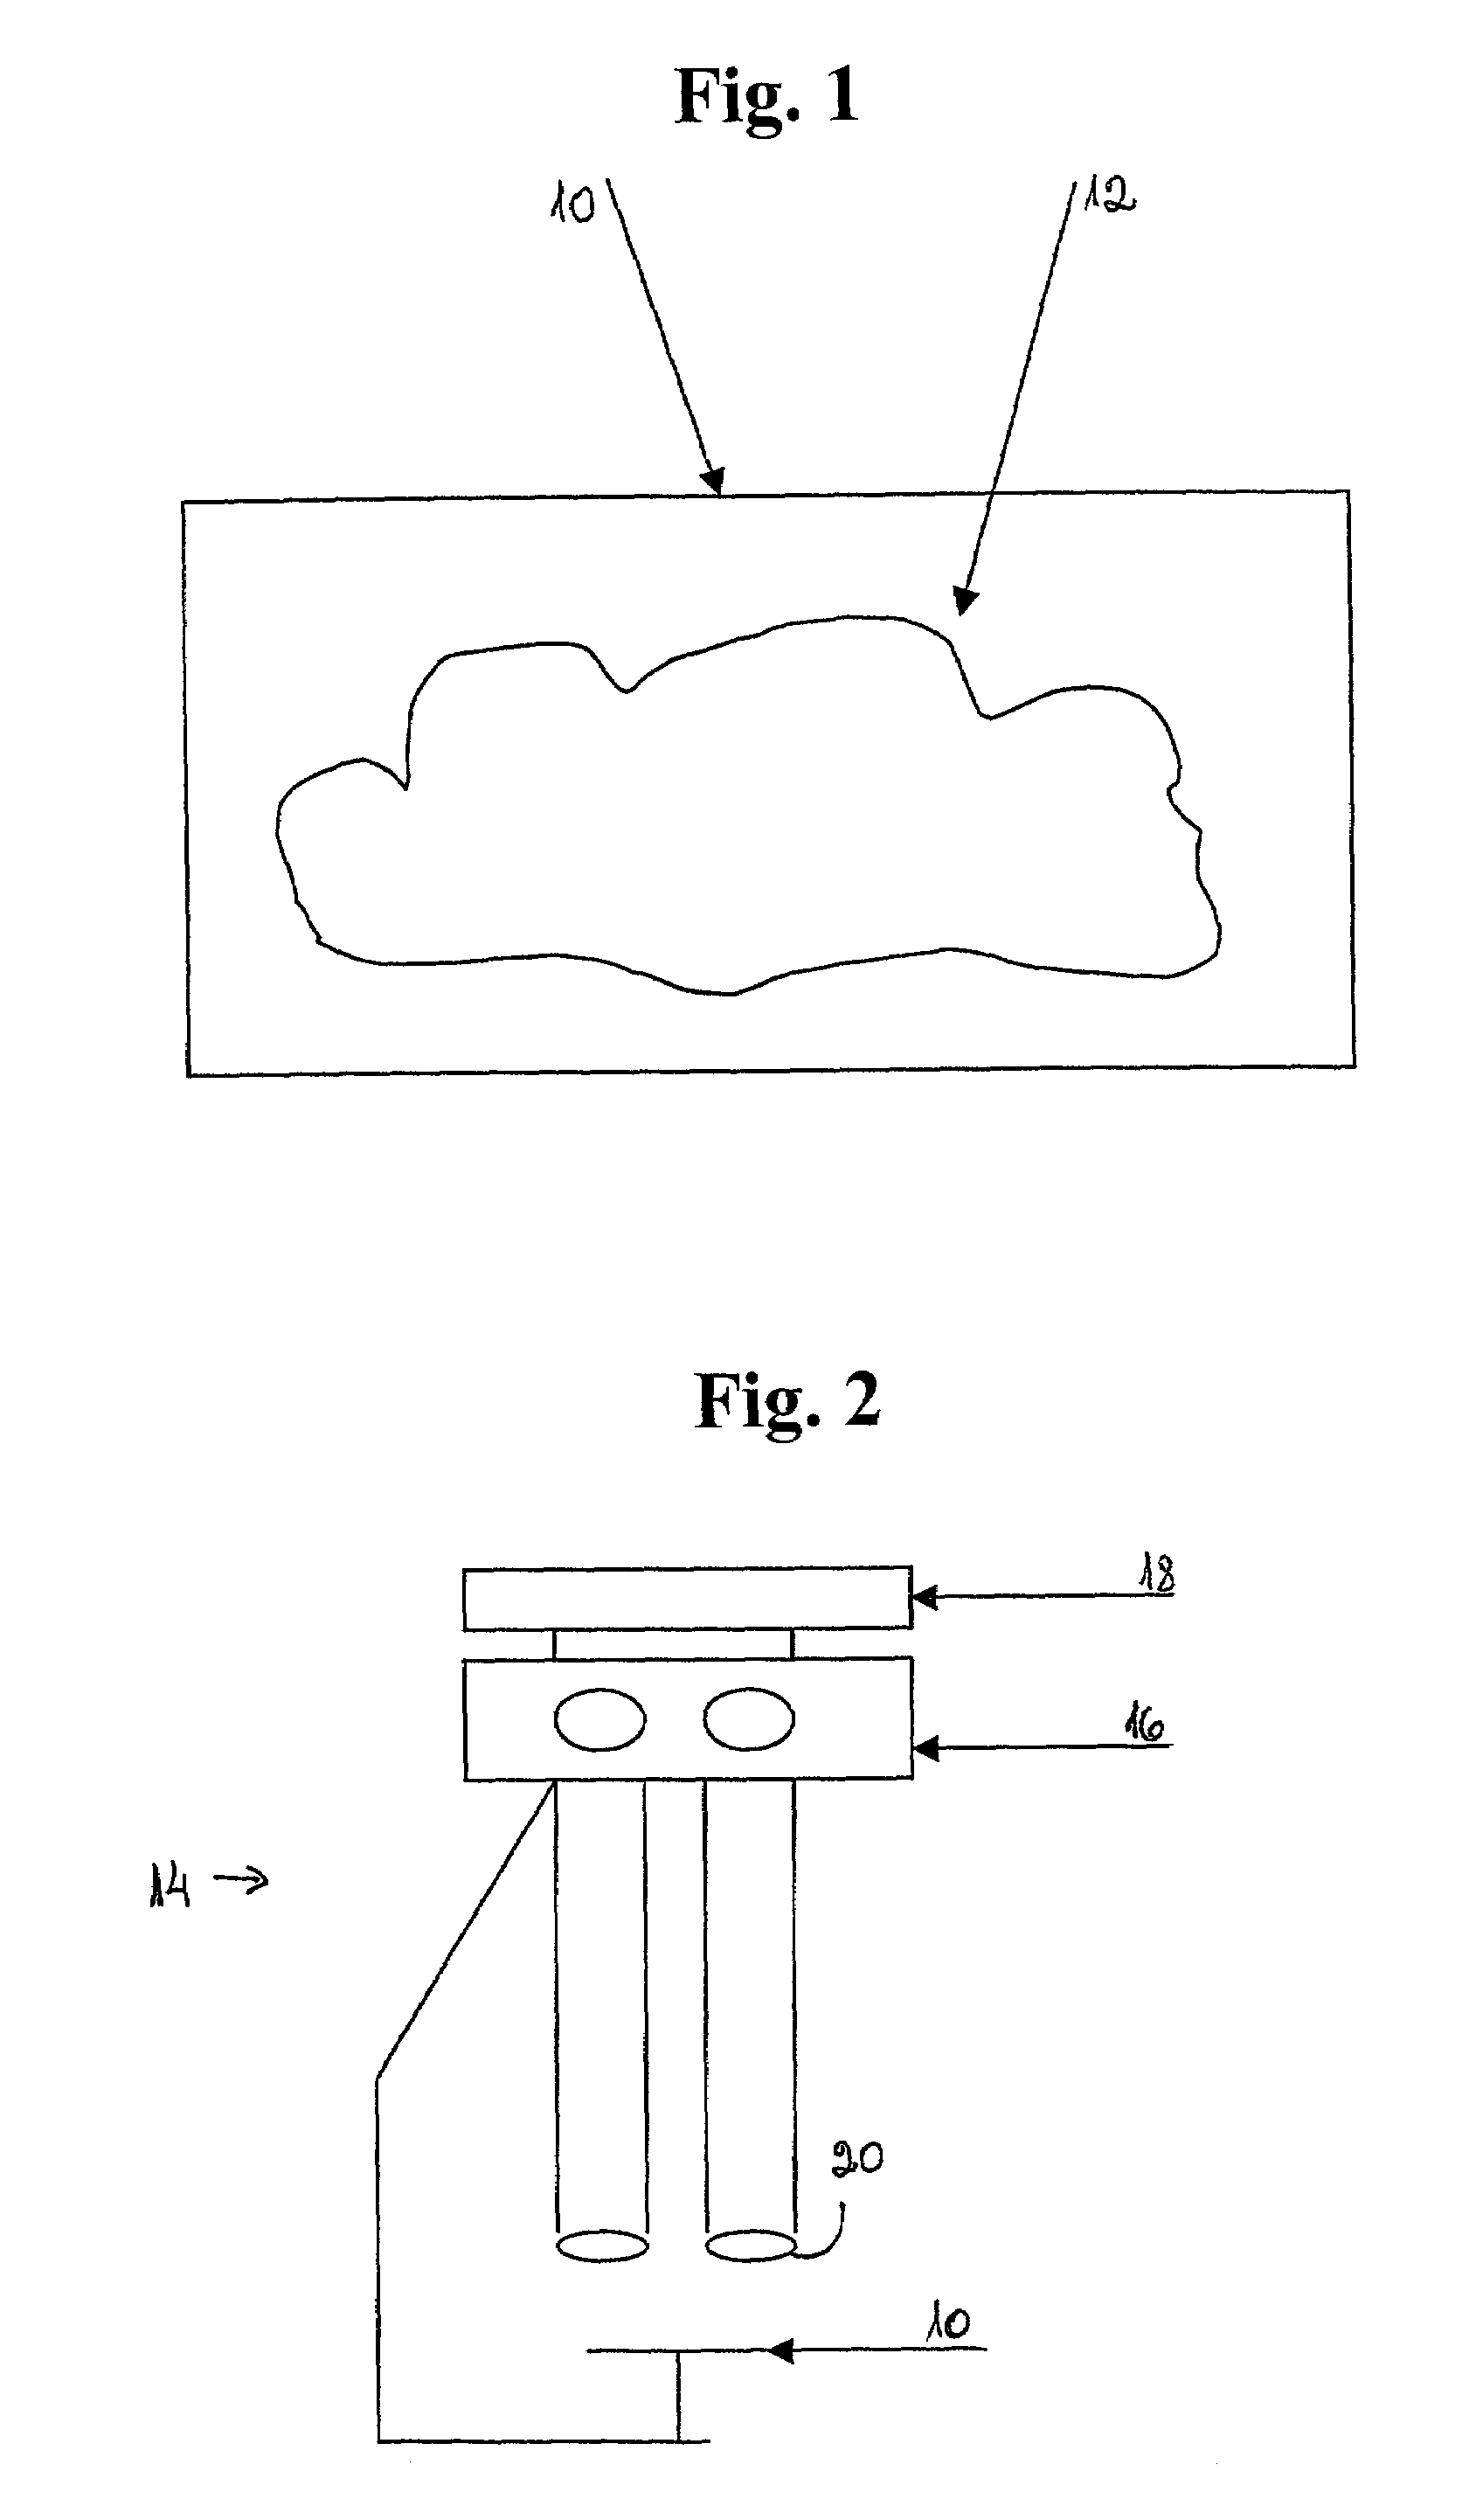 Medical decision support system and method